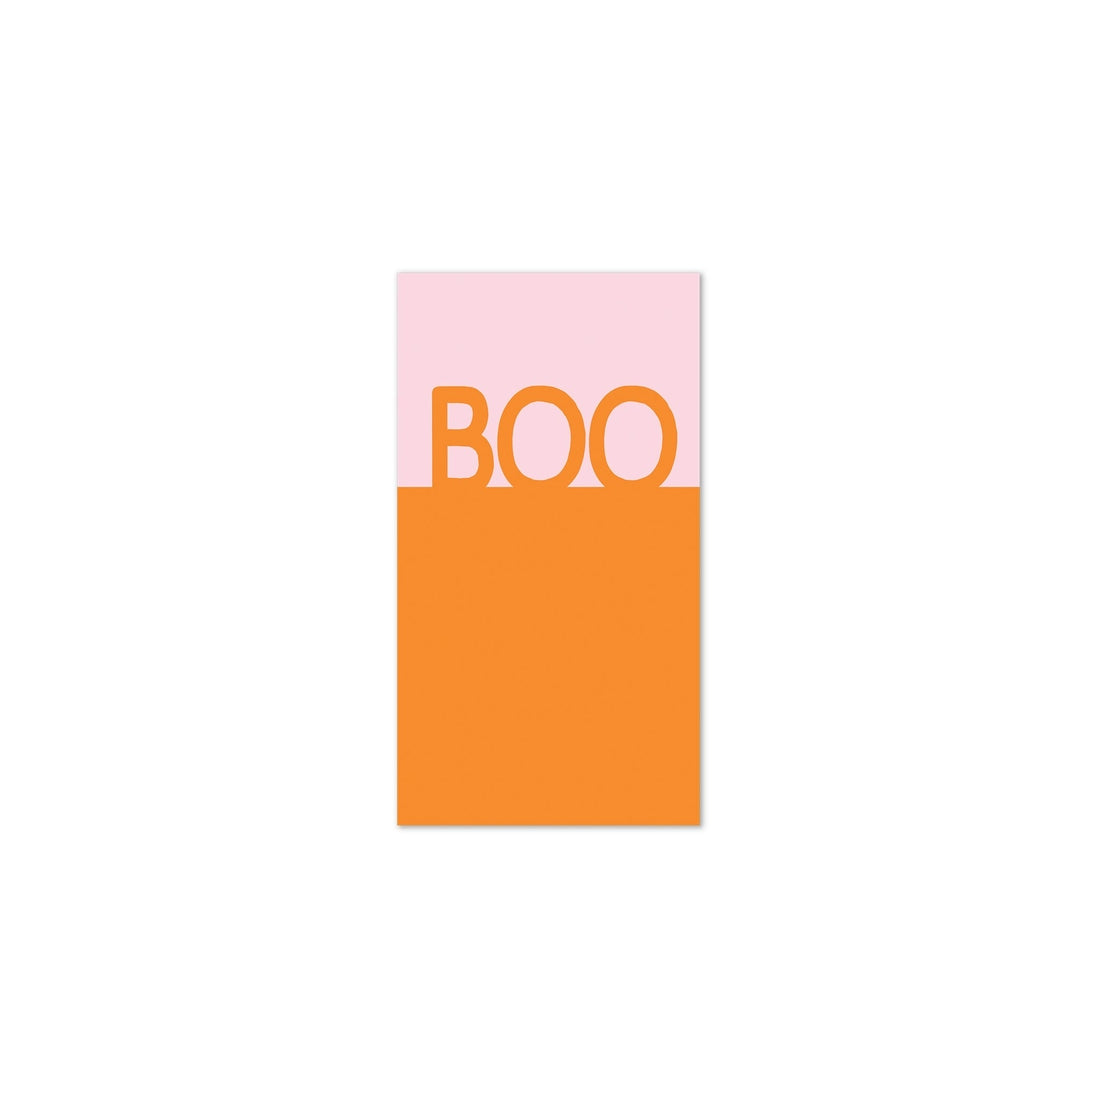 Happy Haunting Boo Guest Towels (24)